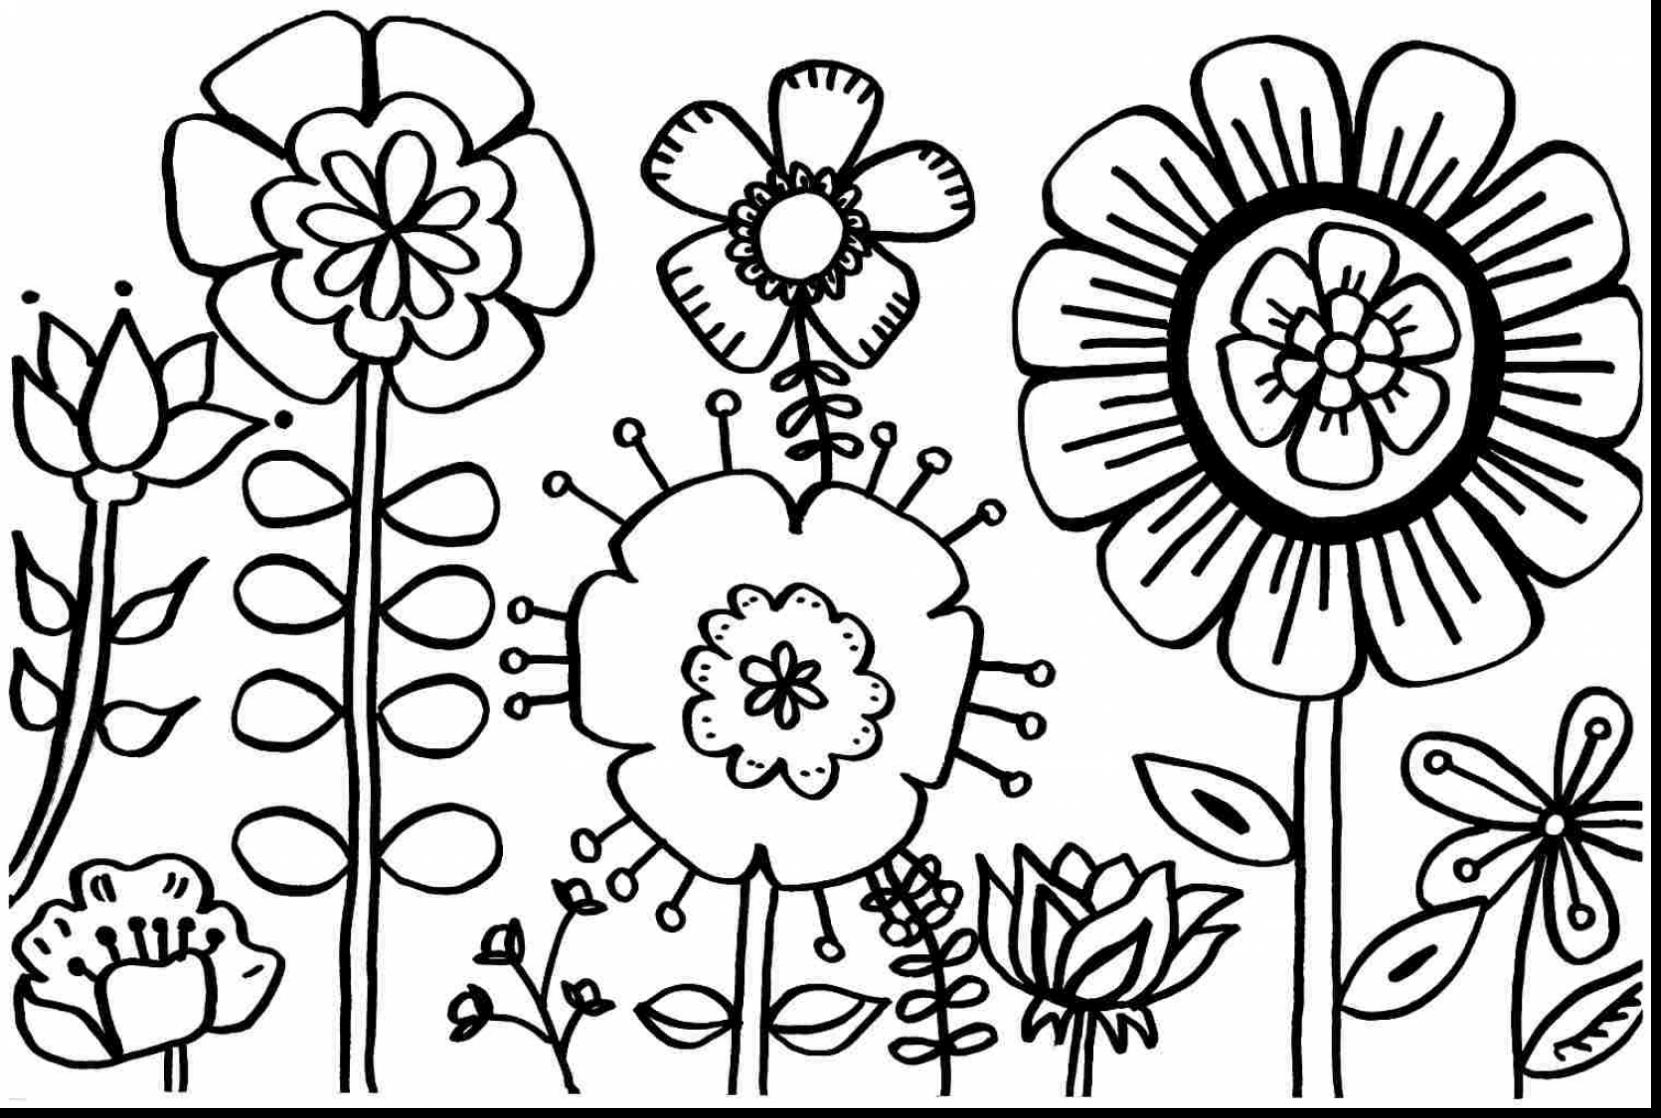 Free Printable Spring Coloring Pages | All Coloring Pages - Spring Coloring Sheets Free Printable